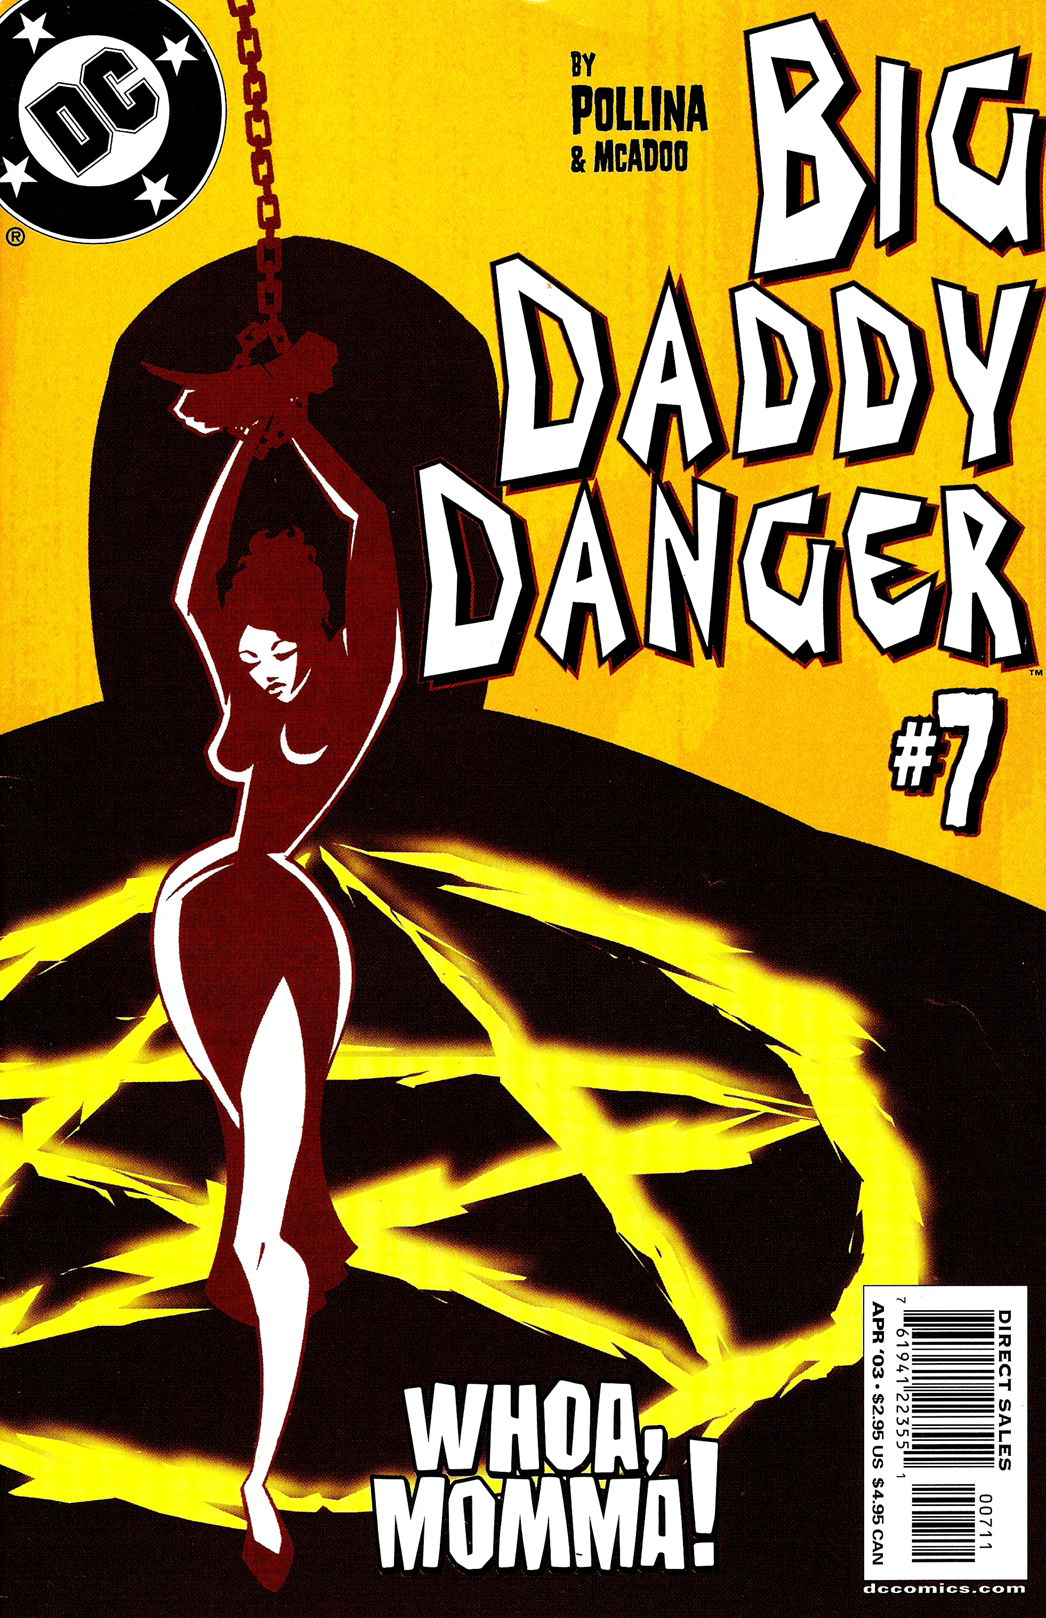 Read online Big Daddy Danger comic -  Issue #7 - 1